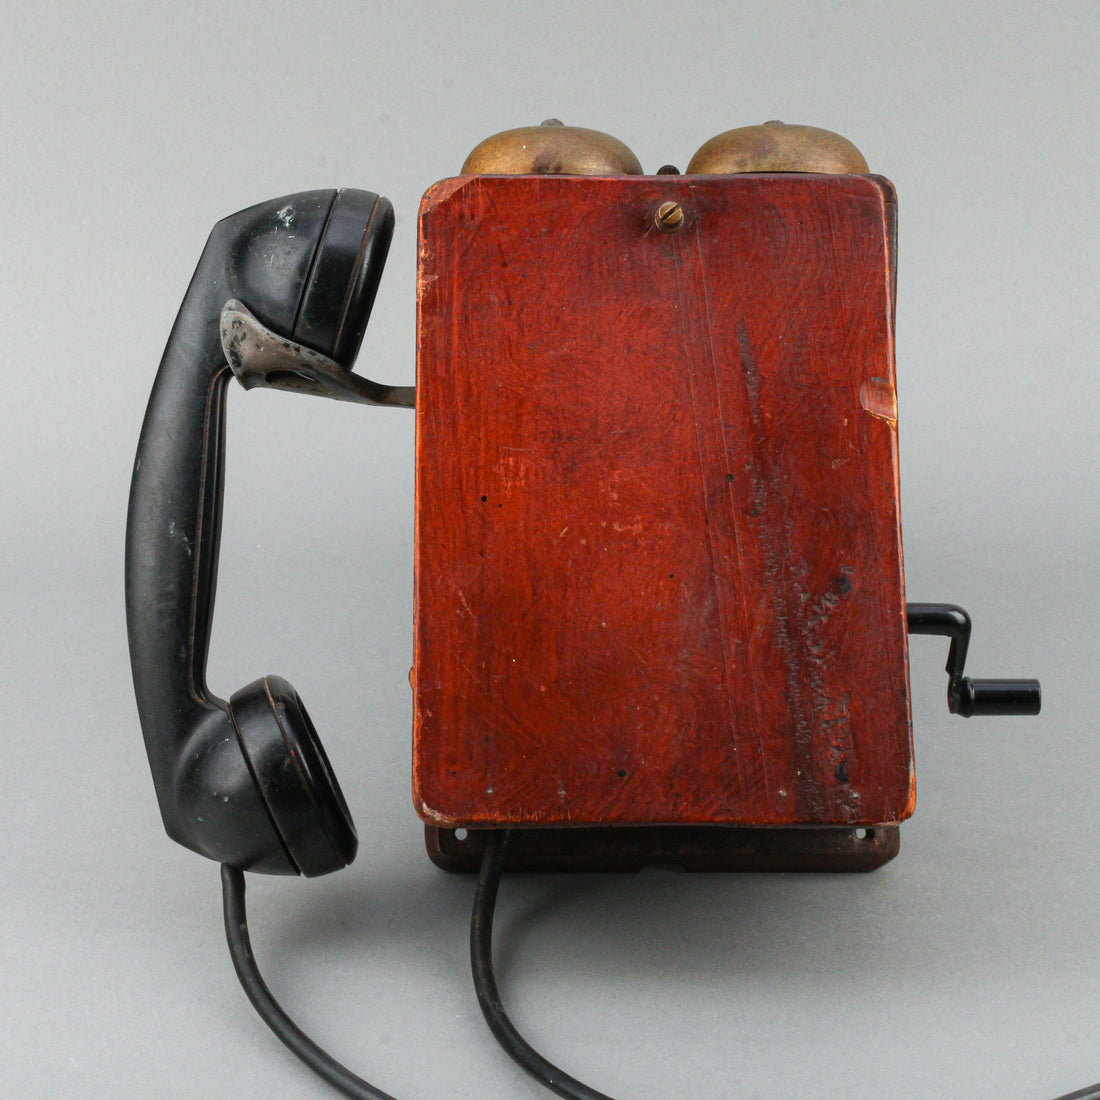 NORTHERN ELECTRIC Vintage Wooden Wallmount Crank Telephone